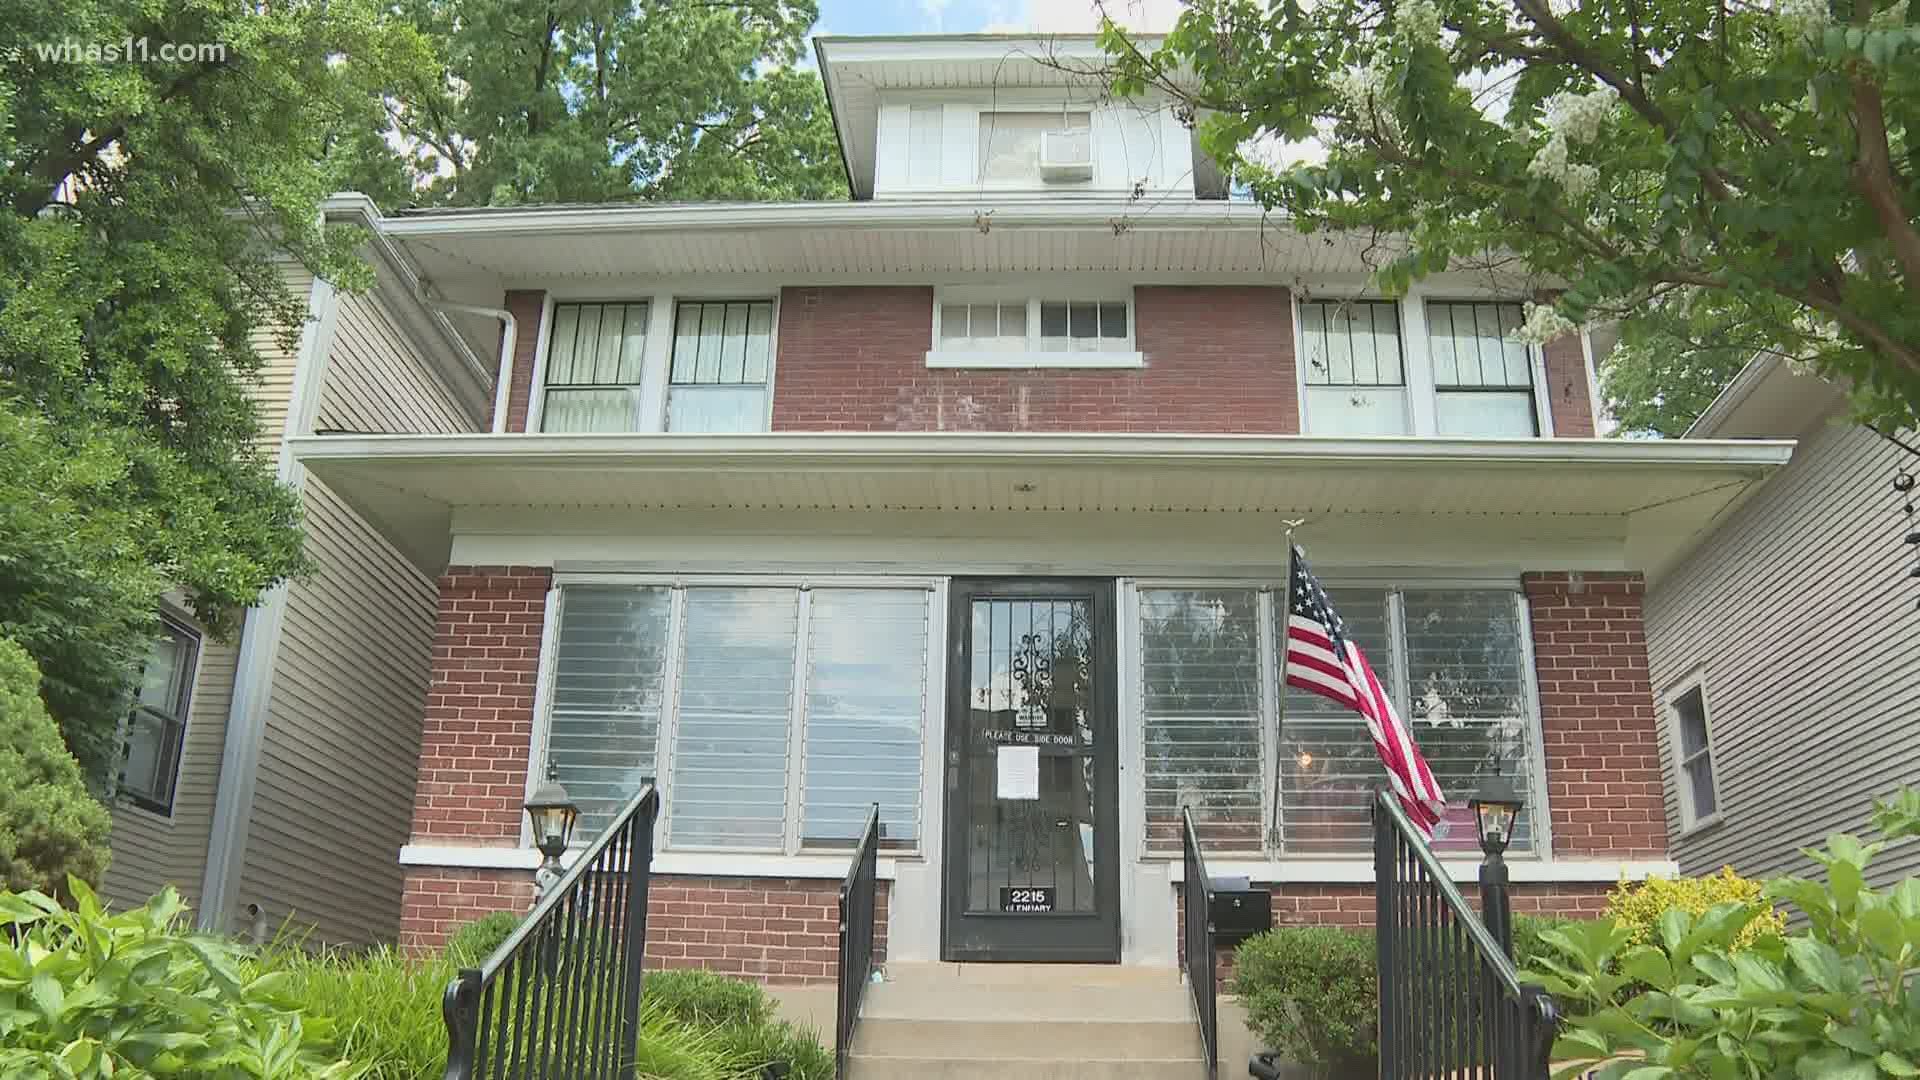 For 41 years, Glenmary Home has been helping veterans and challenged adults maintain meaningful lives. Now, it is at risk of closing.